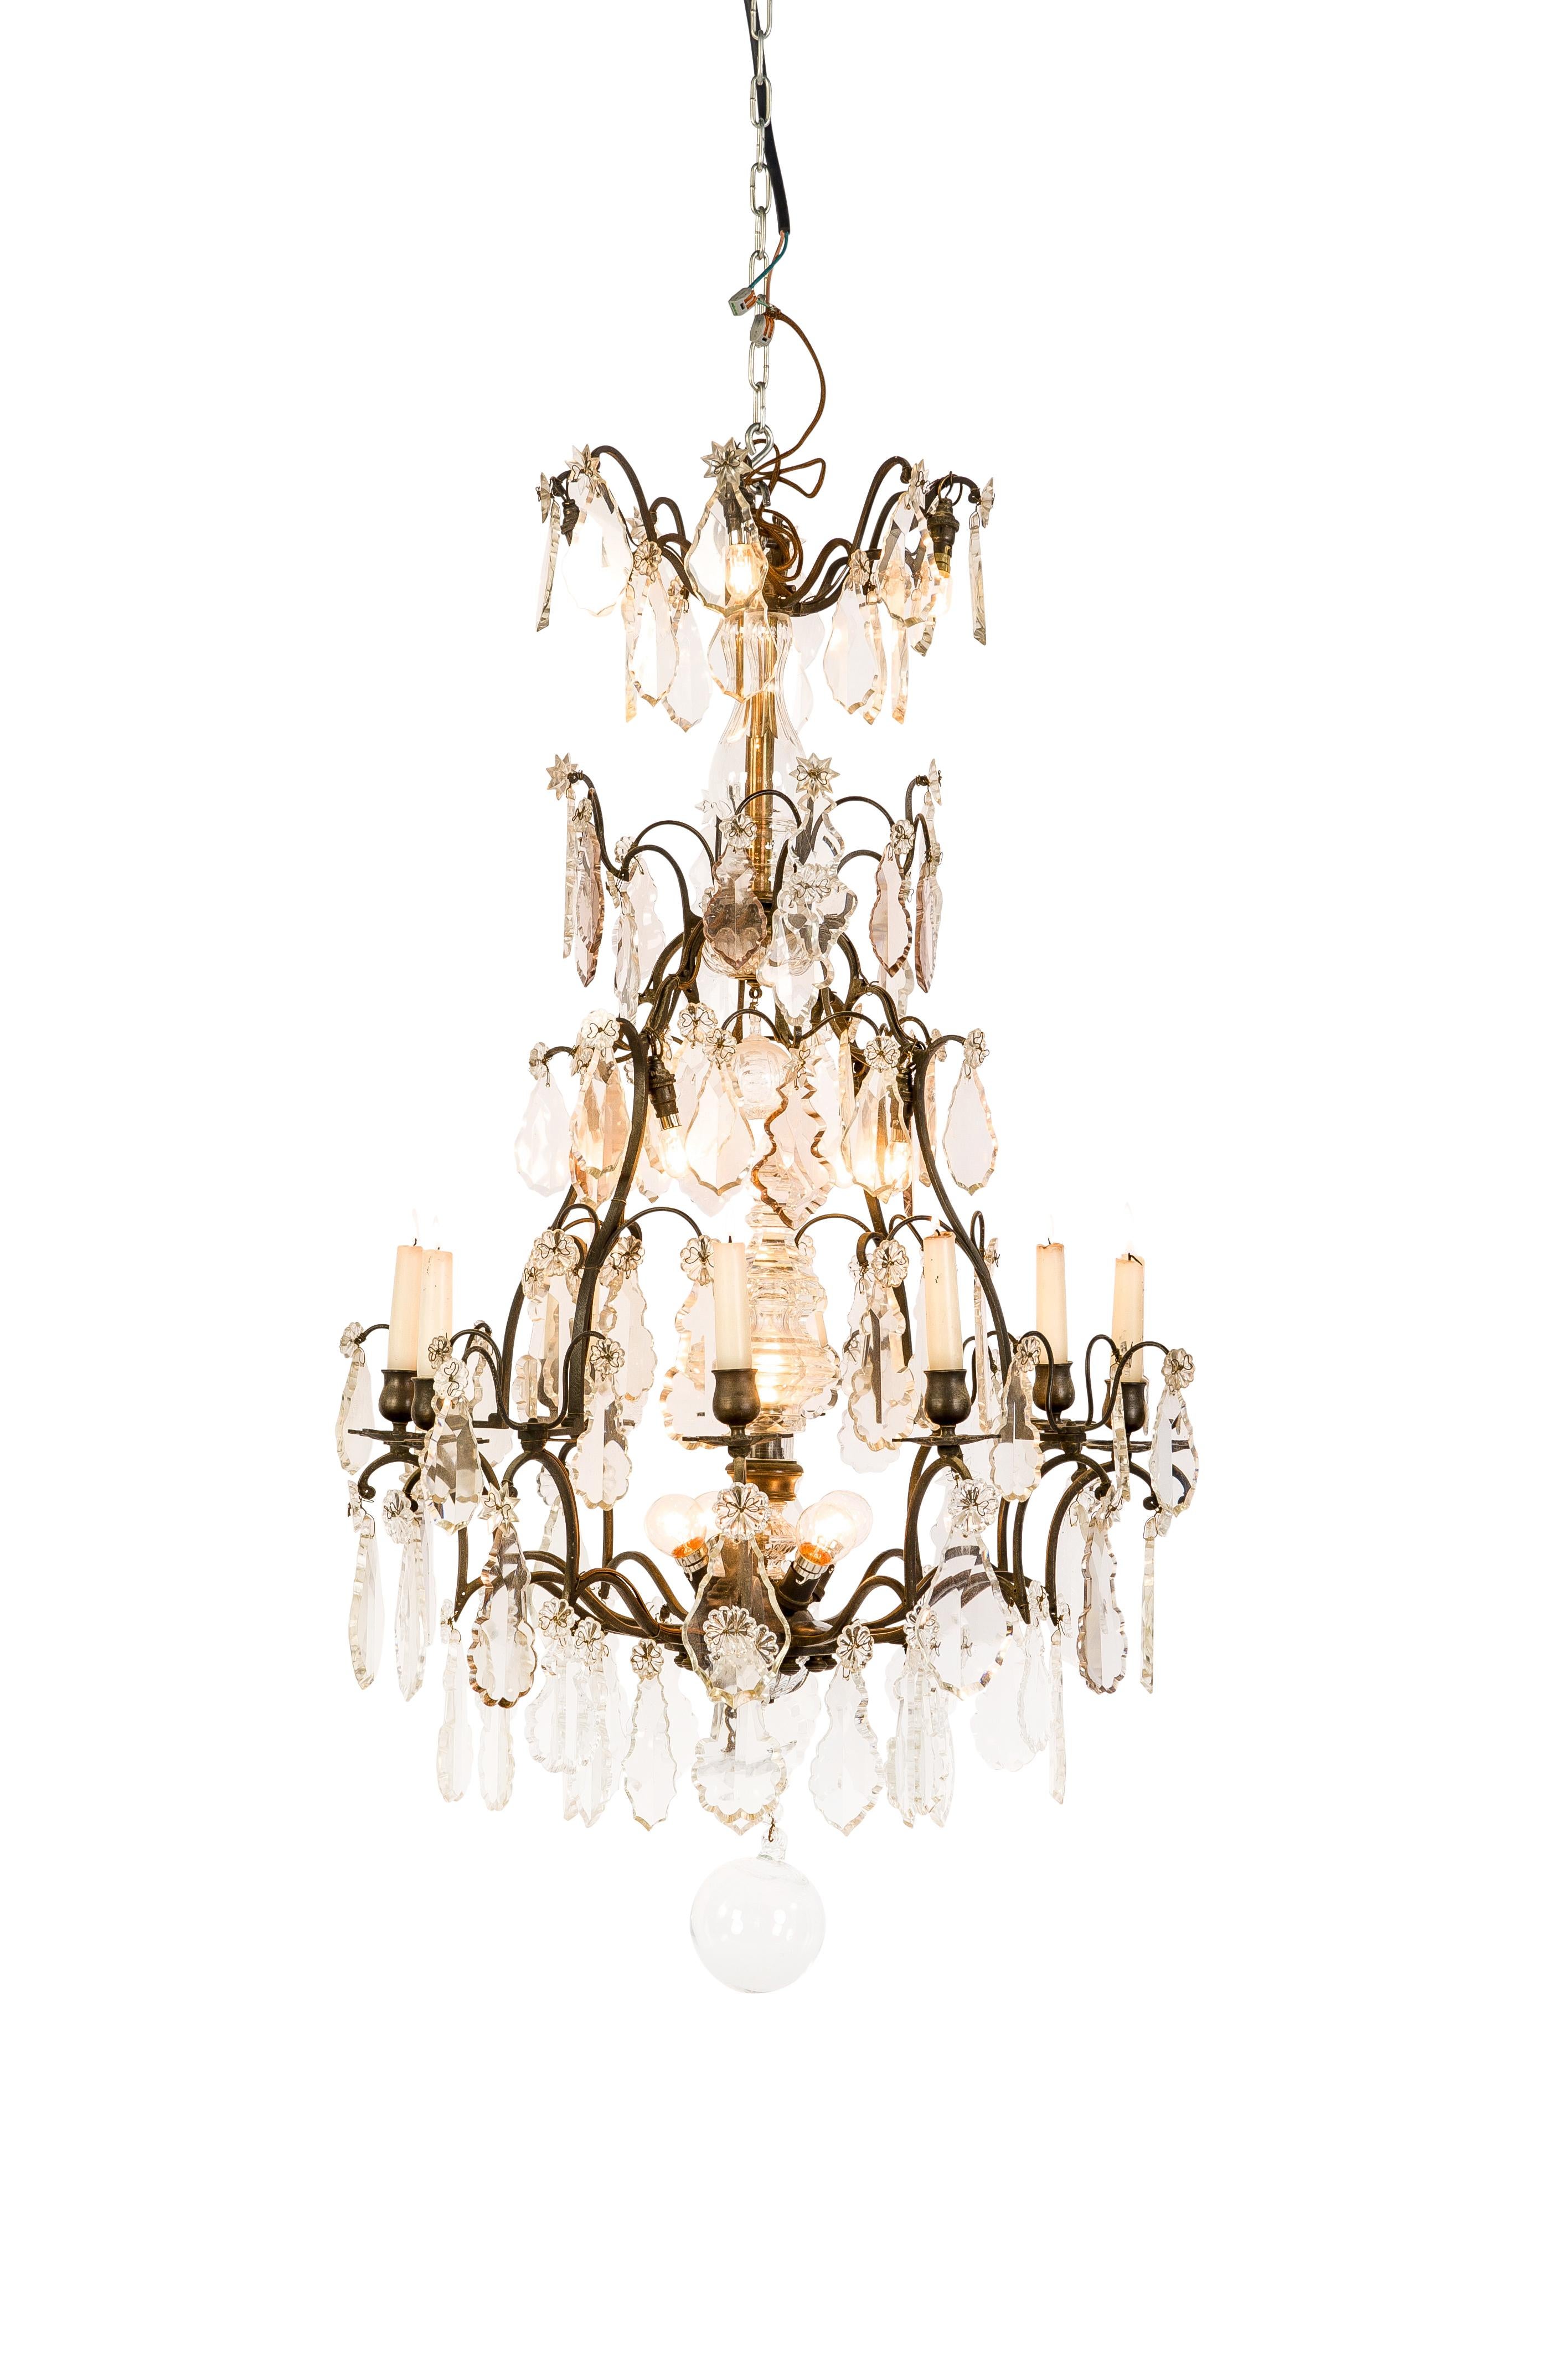 19th Century Bronze Chandelier with Cut Crystal Ornaments and Candles and Lights For Sale 13